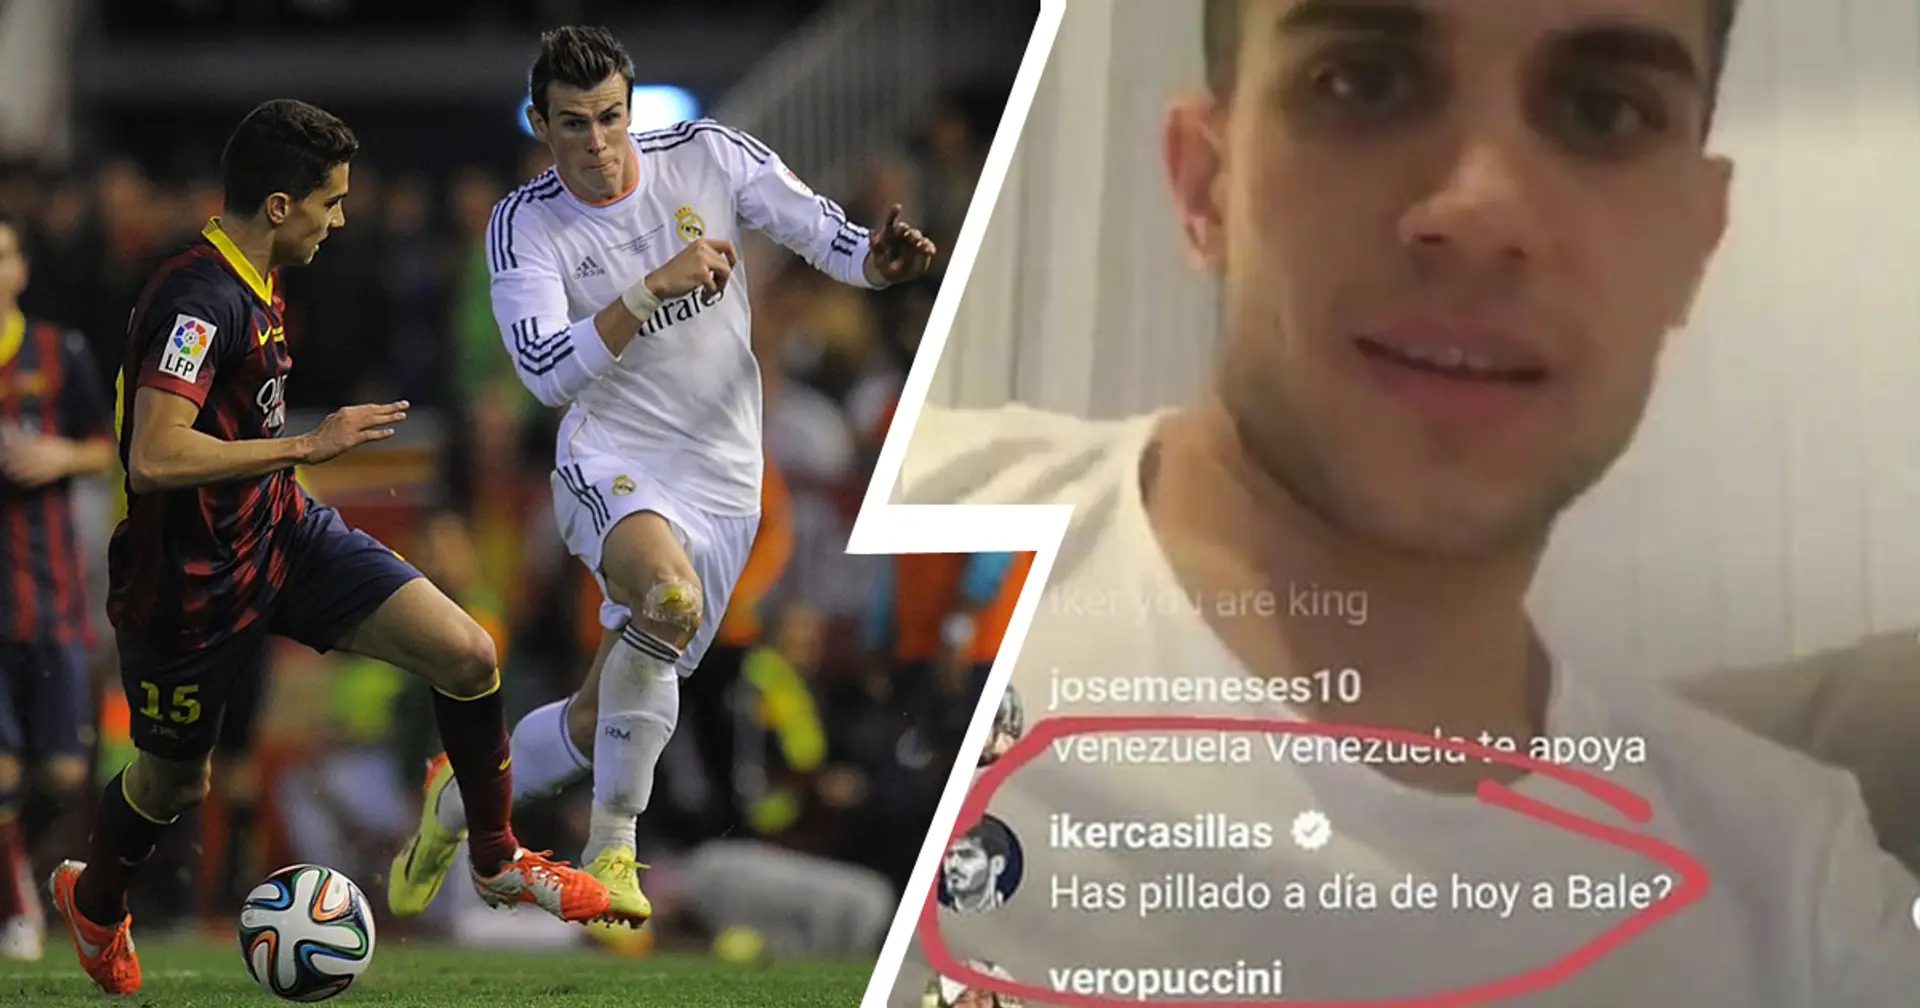 'Have you caught Bale today?': Casillas pokes fun at Marc Bartra by recalling every Madrid fan's favourite Clasico episode